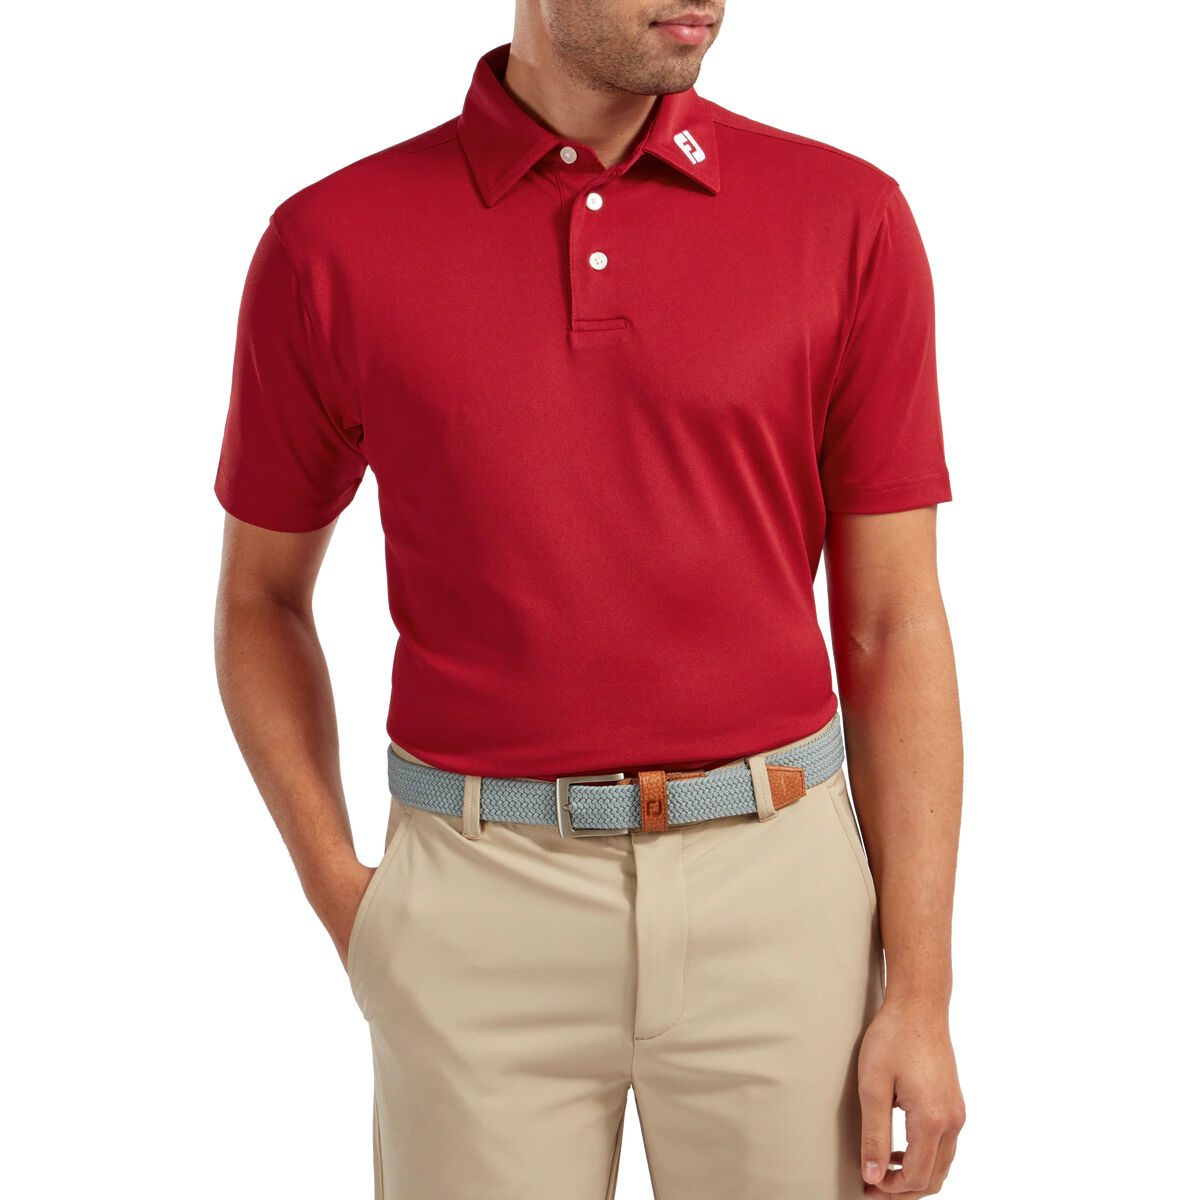 FootJoy Men’s Stretch Pique Solid Colour Golf Polo Shirt, Mens, Red, Small | American Golf